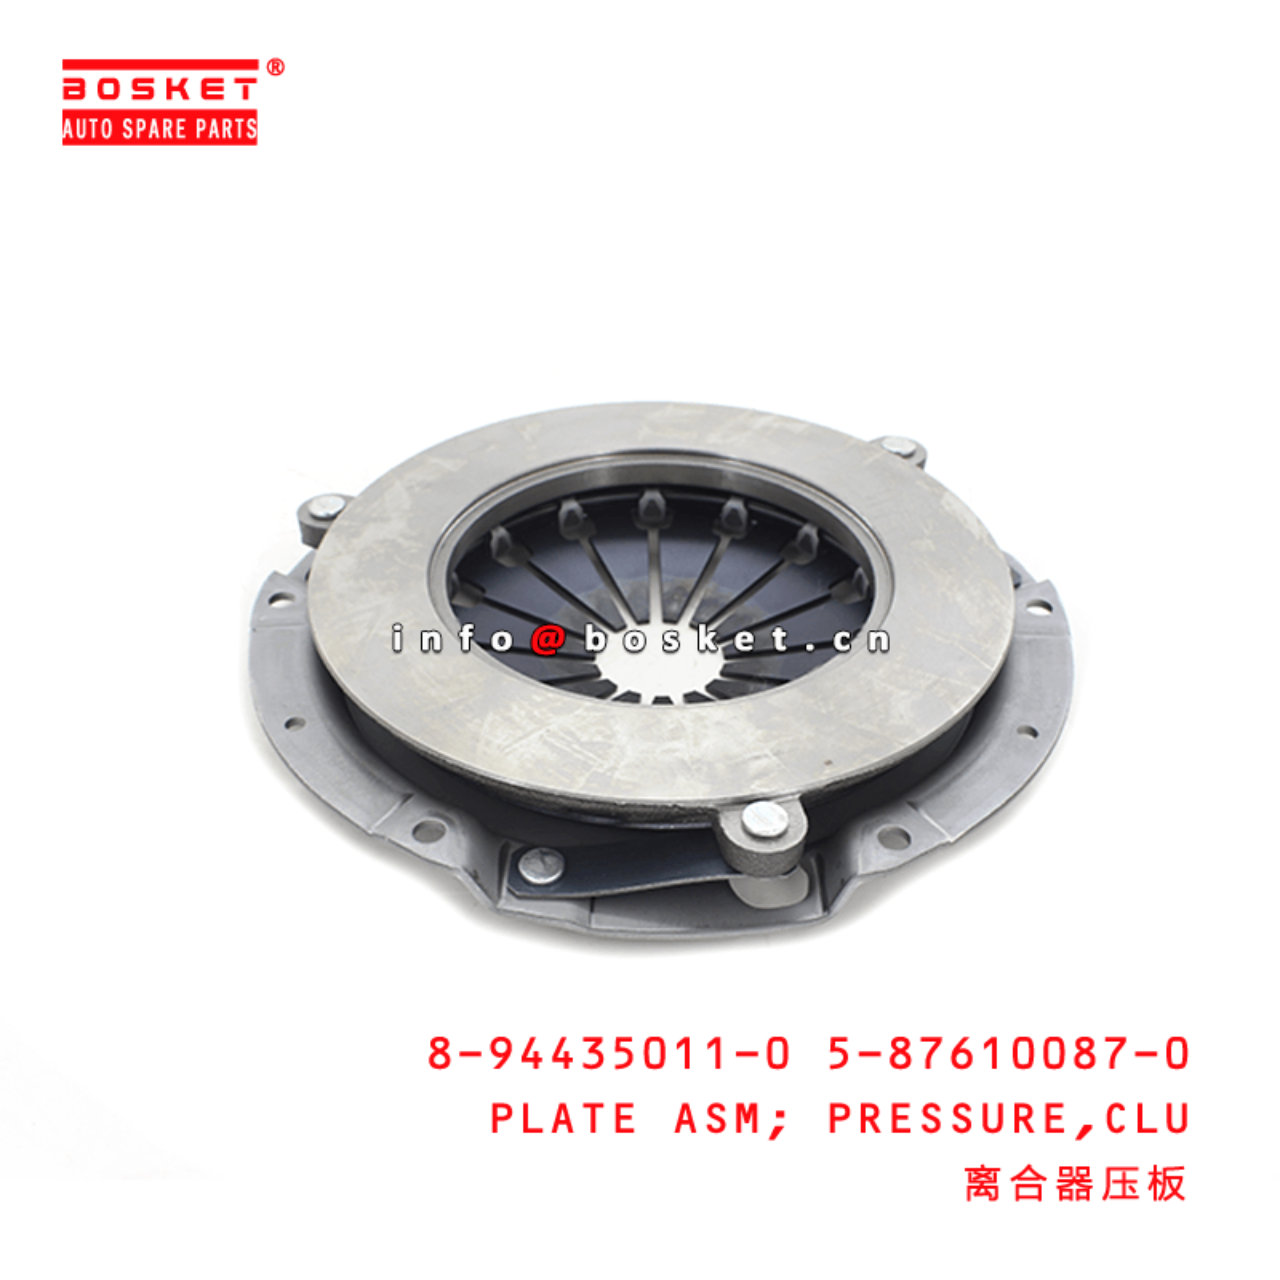 8-94435011-0 5-87610087-0 Clutch Pressure Plate Assembly 8944350110 5876100870 Suitable for ISUZU TF